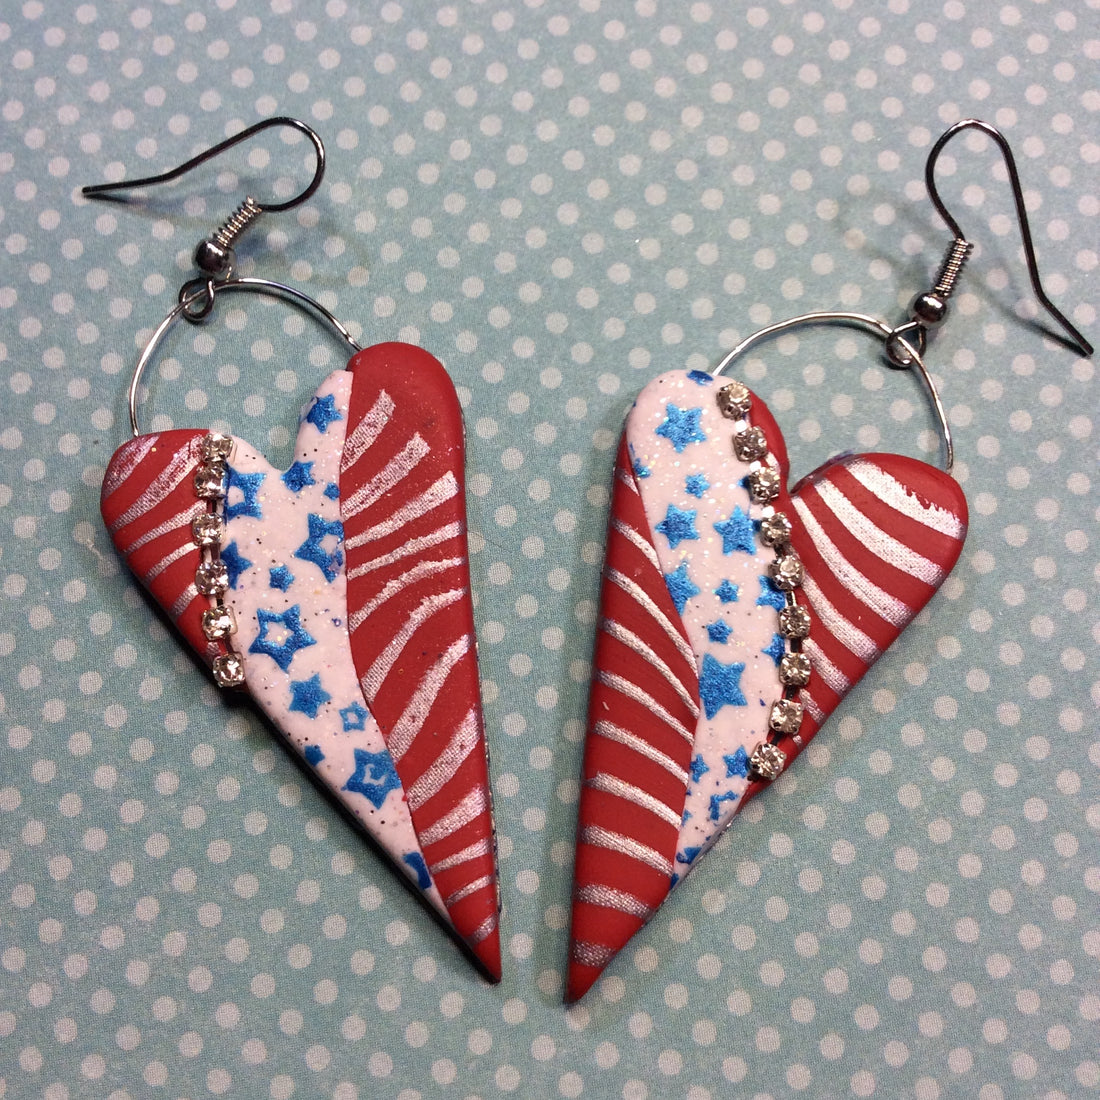 Stars and Stripes 15 minute polymer clay earrings for Fourth of July